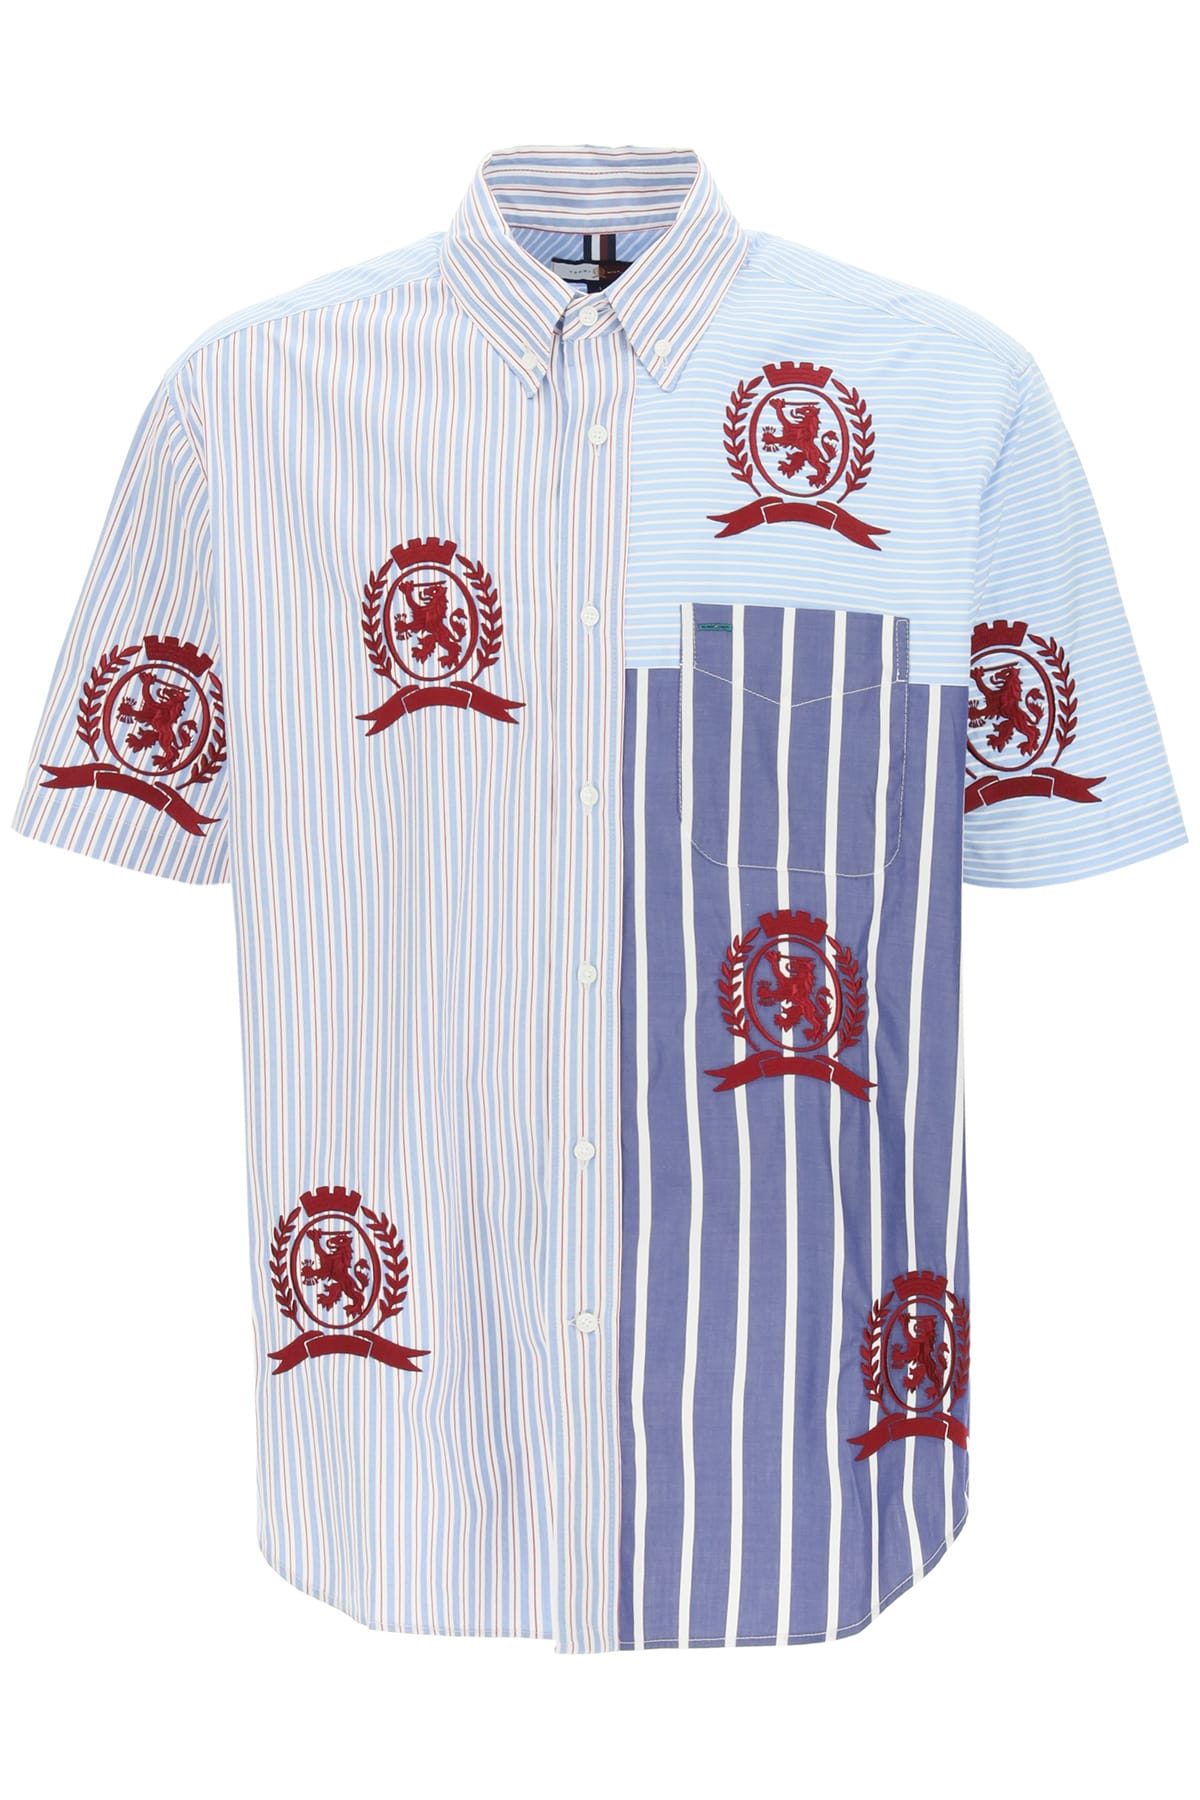 Tommy Hilfiger Striped Shirt With Embroidered Emblems